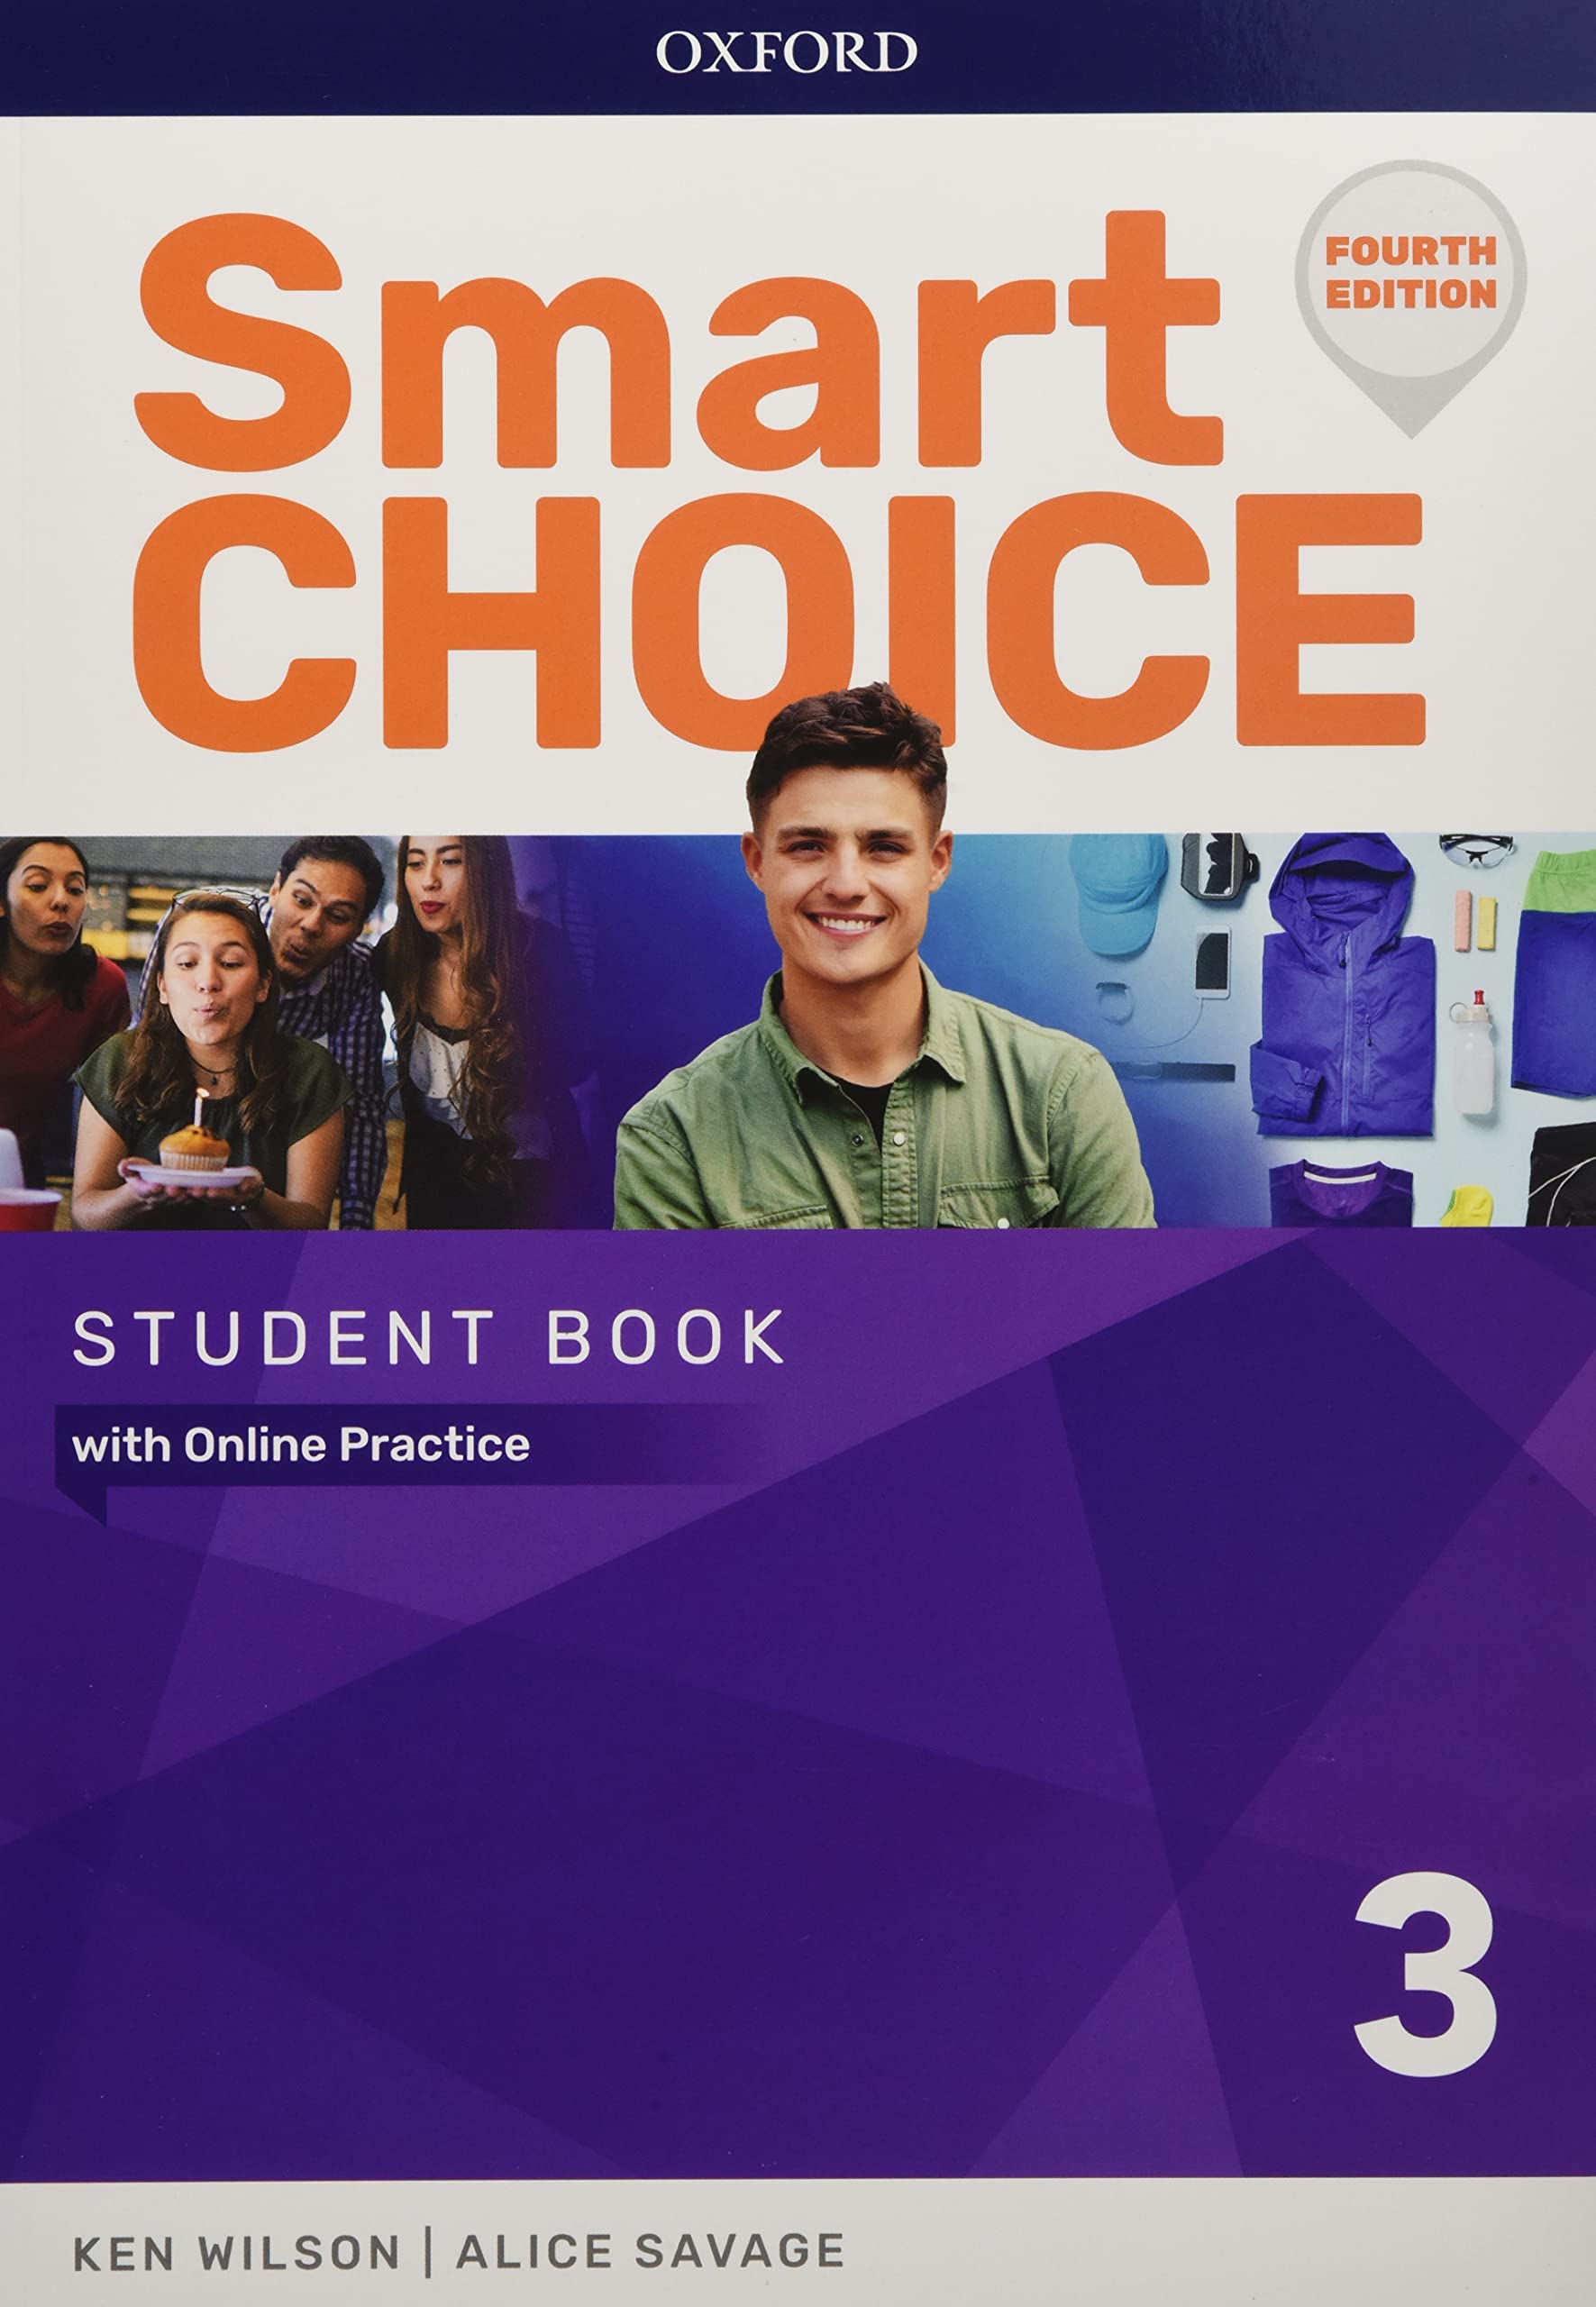 Smart Choice 4E 3 SB with Online Practice